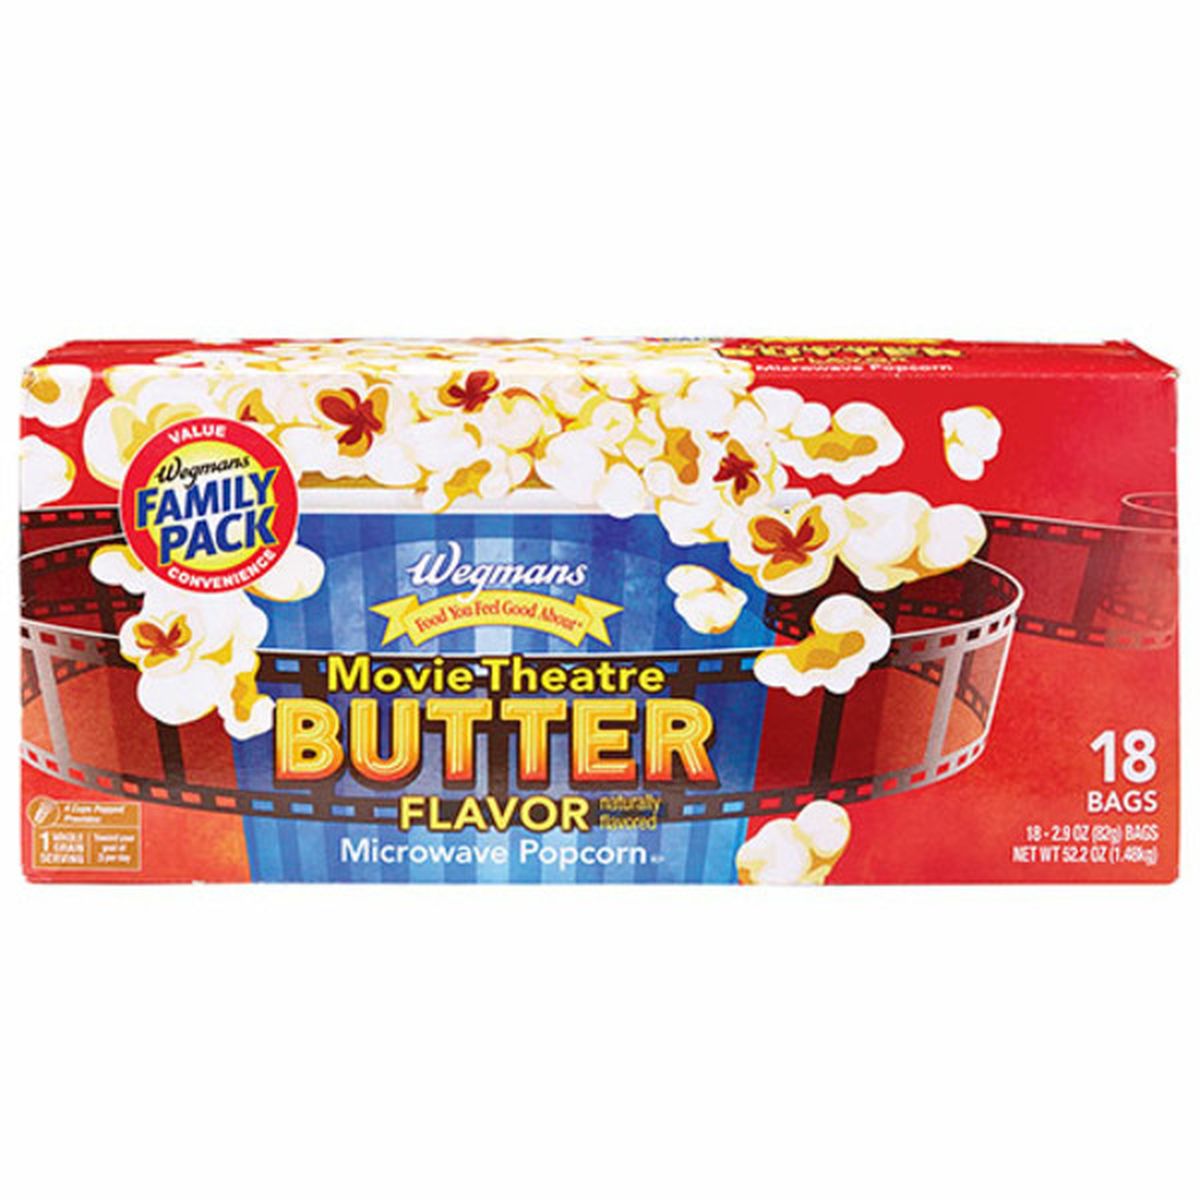 Calories in Wegmans Microwave Popcorn, Movie Theatre Butter Flavor, FAMILY PACK